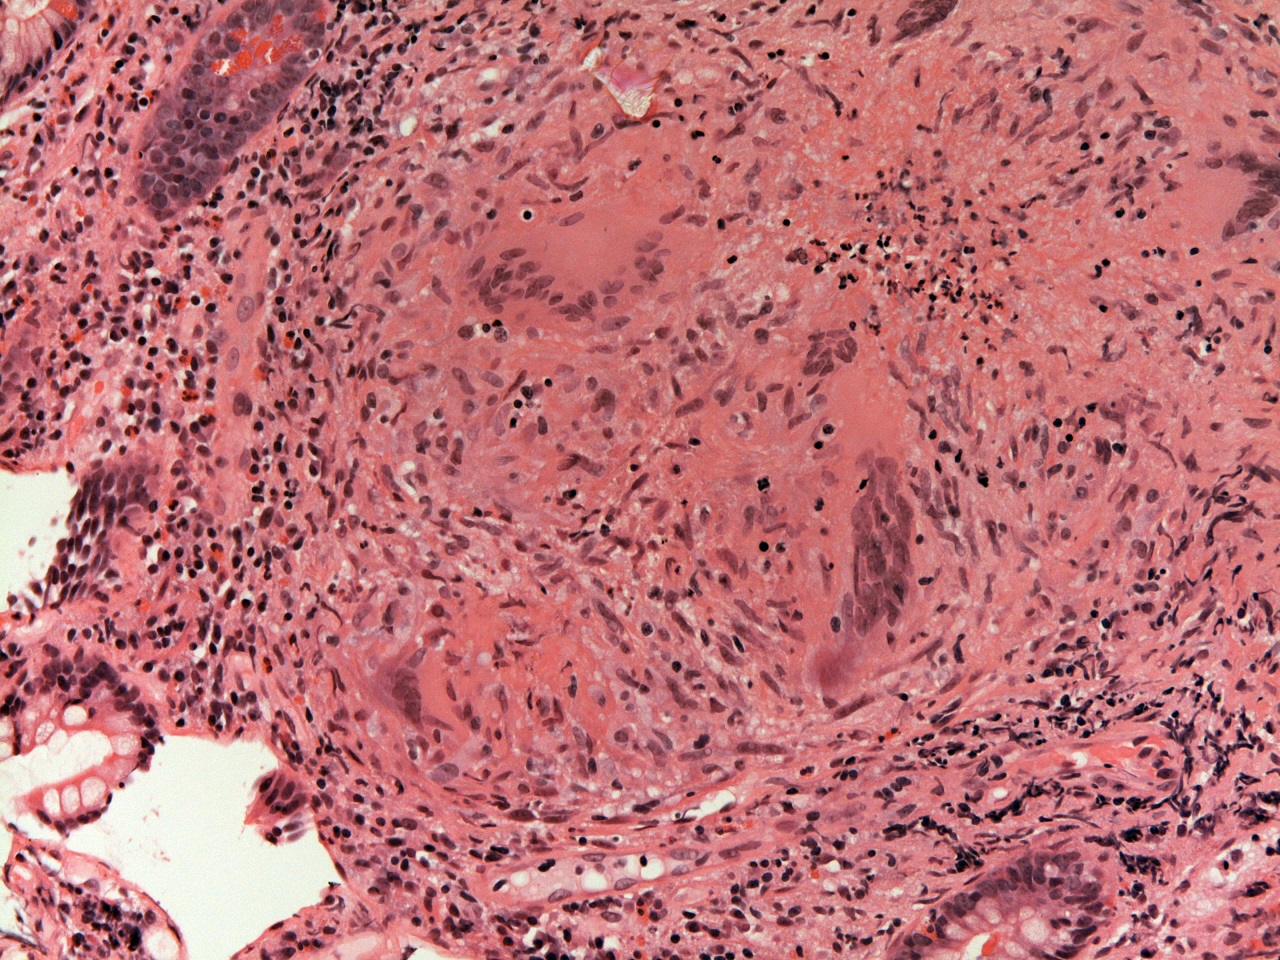 Granuloma with giant cell